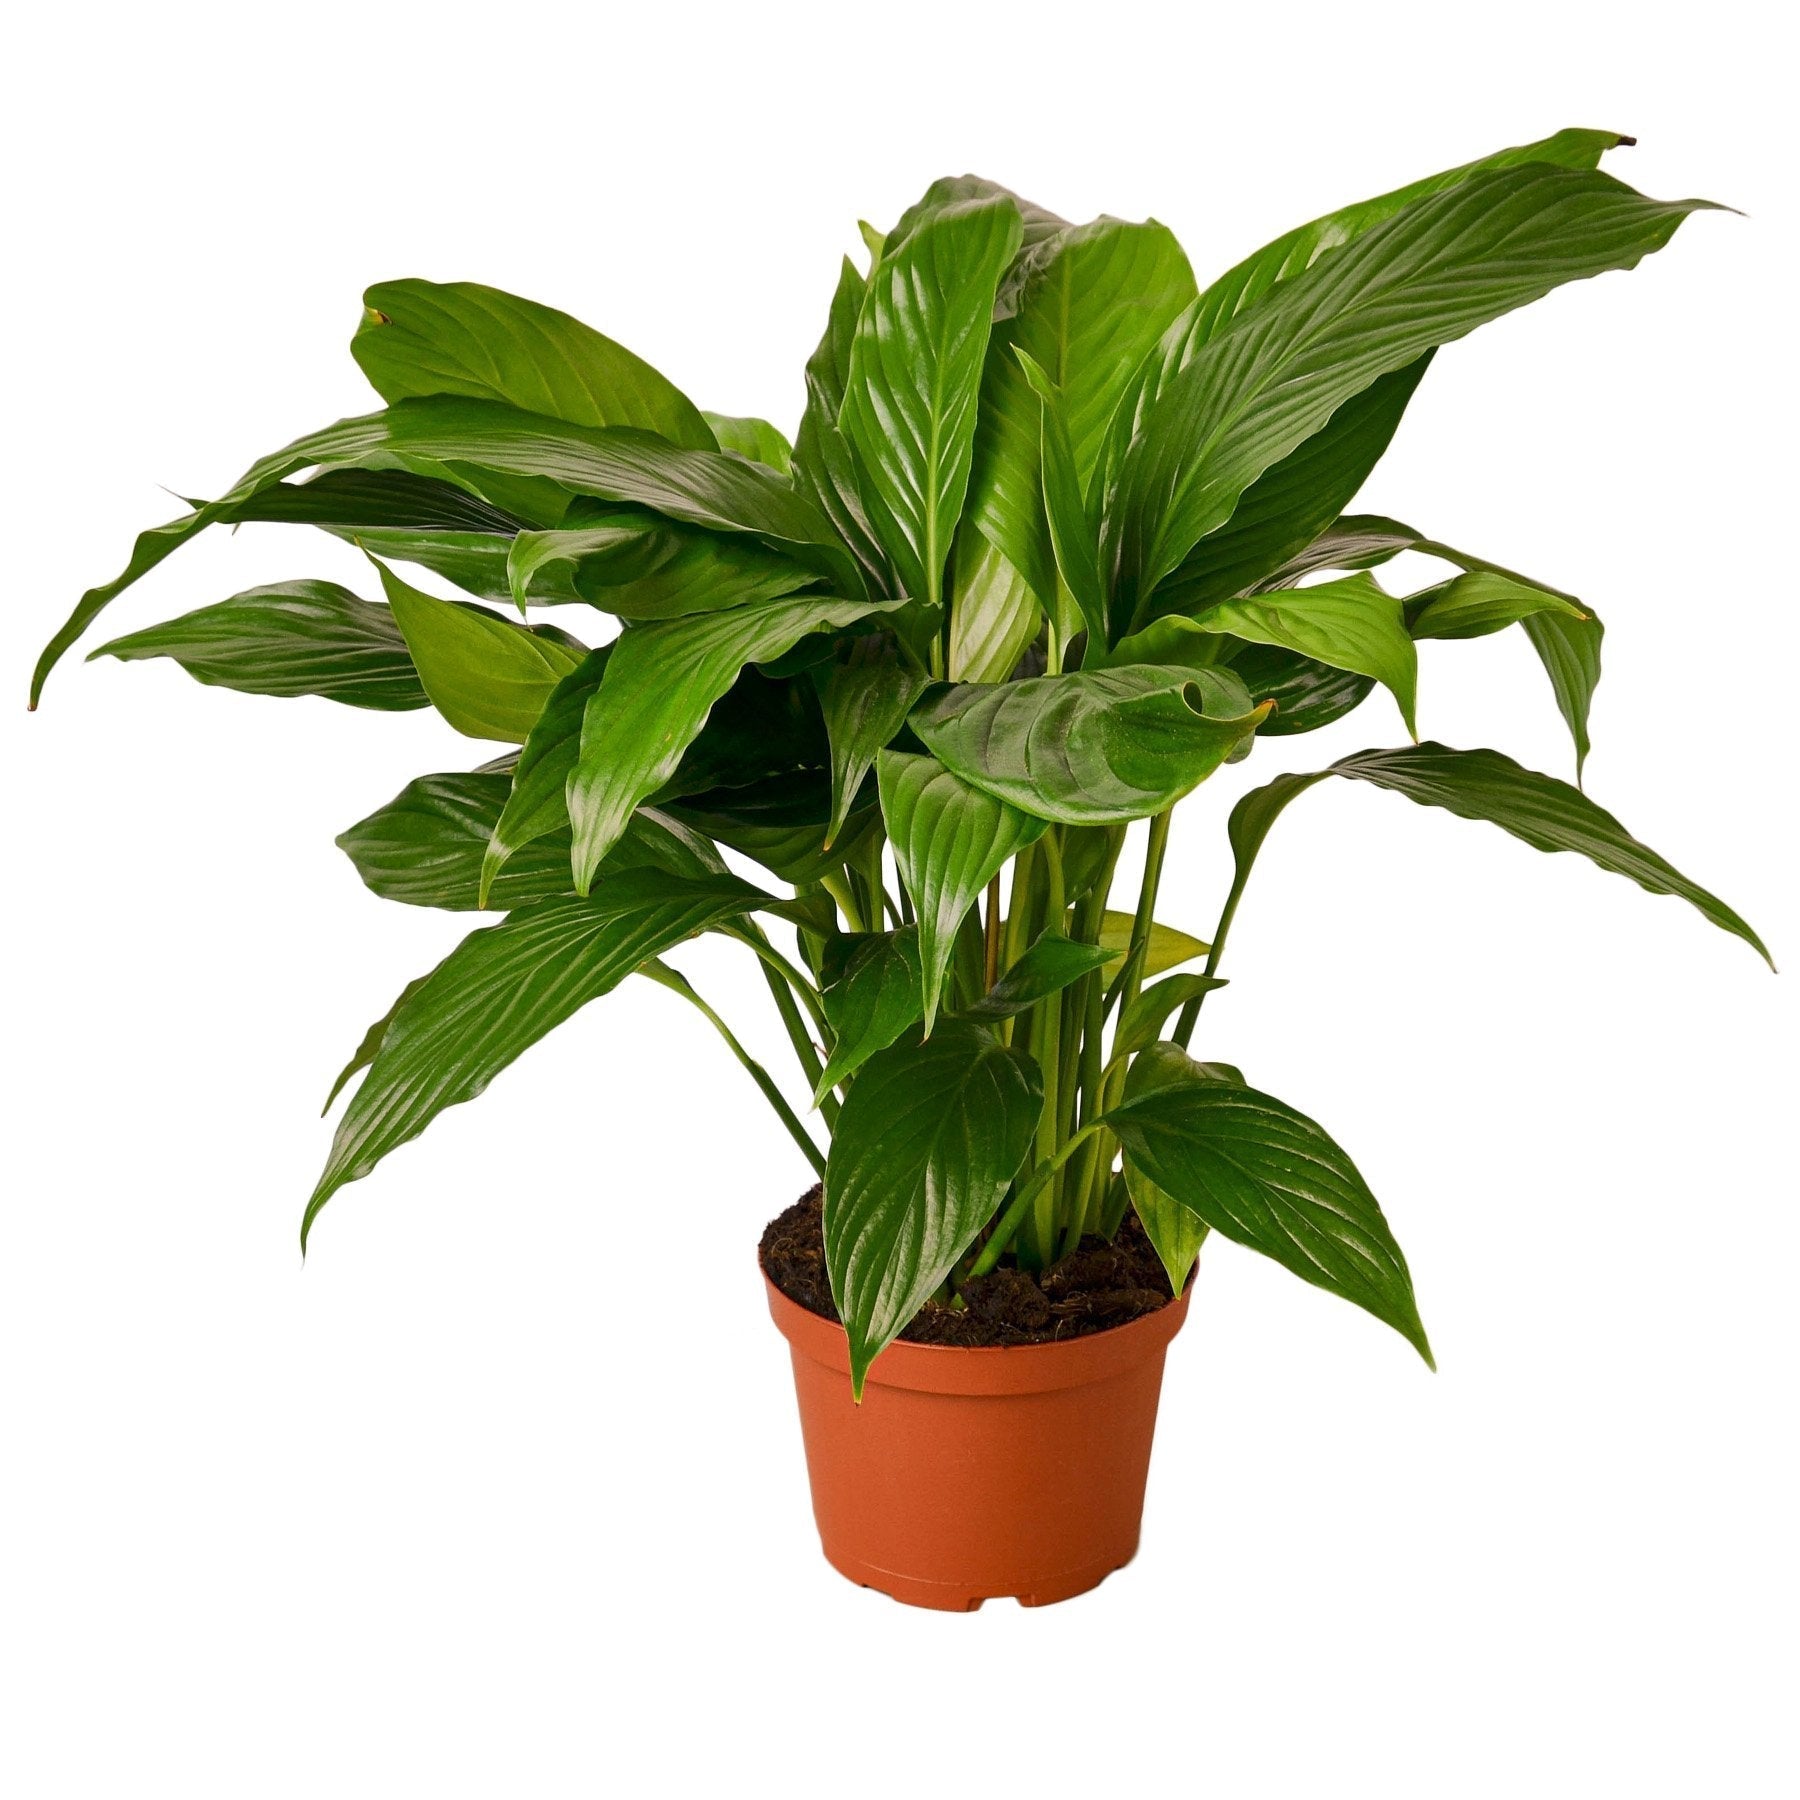 Spathiphyllum 'Peace Lily' - 6" Pot - NURSERY POT ONLY - One Beleaf Away Plant Studio